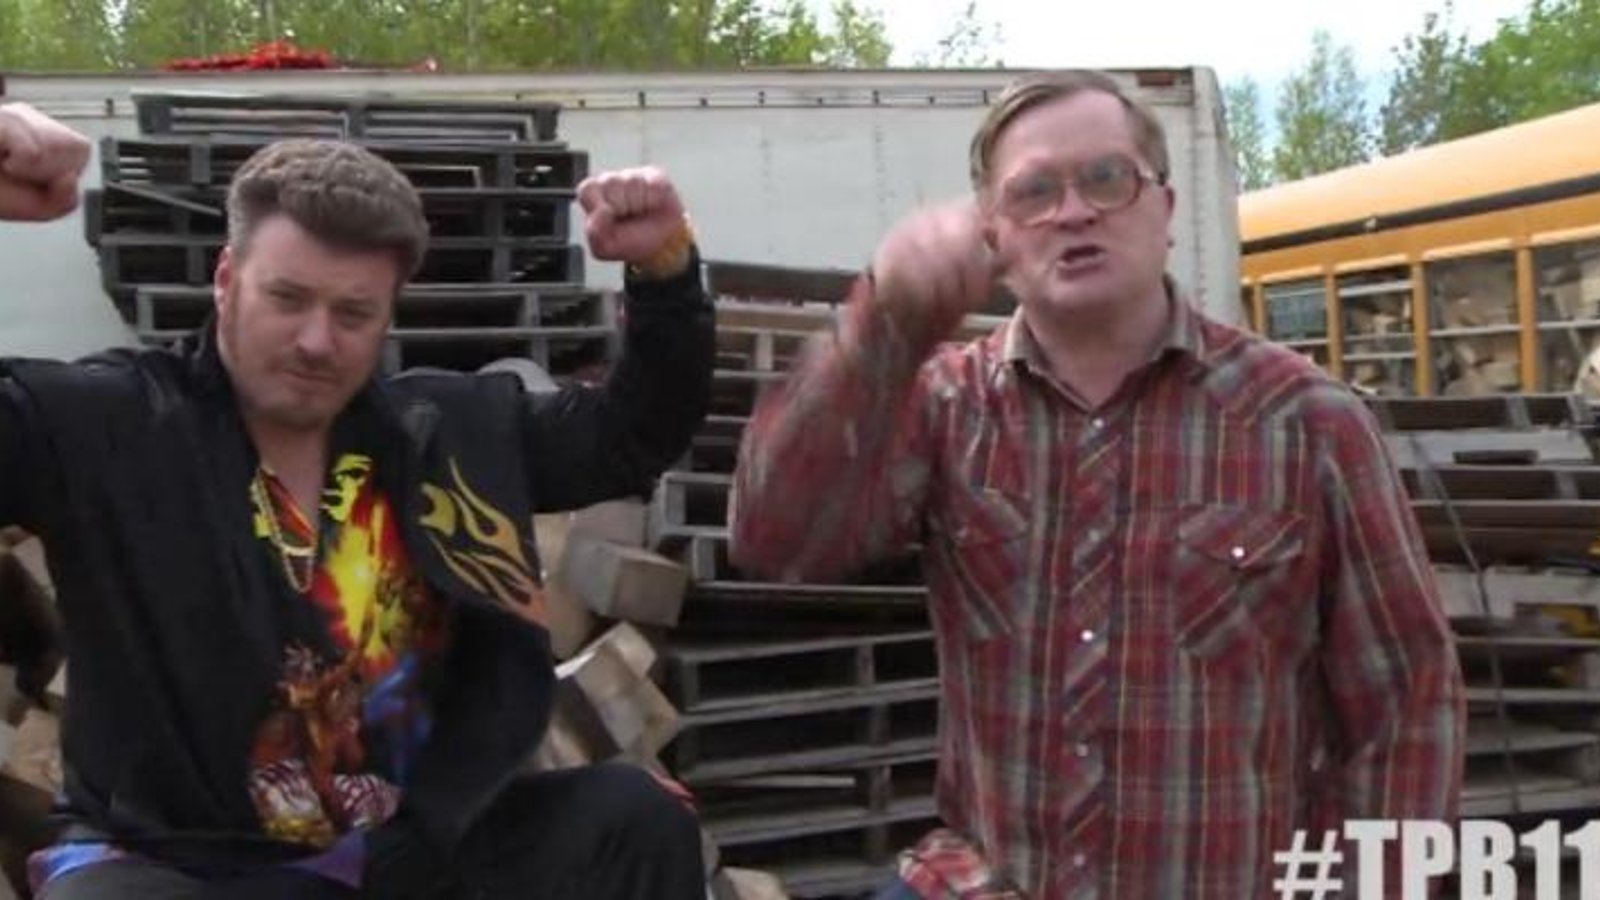 Trailer Park Boys have a message for Crosby and the Penguins.